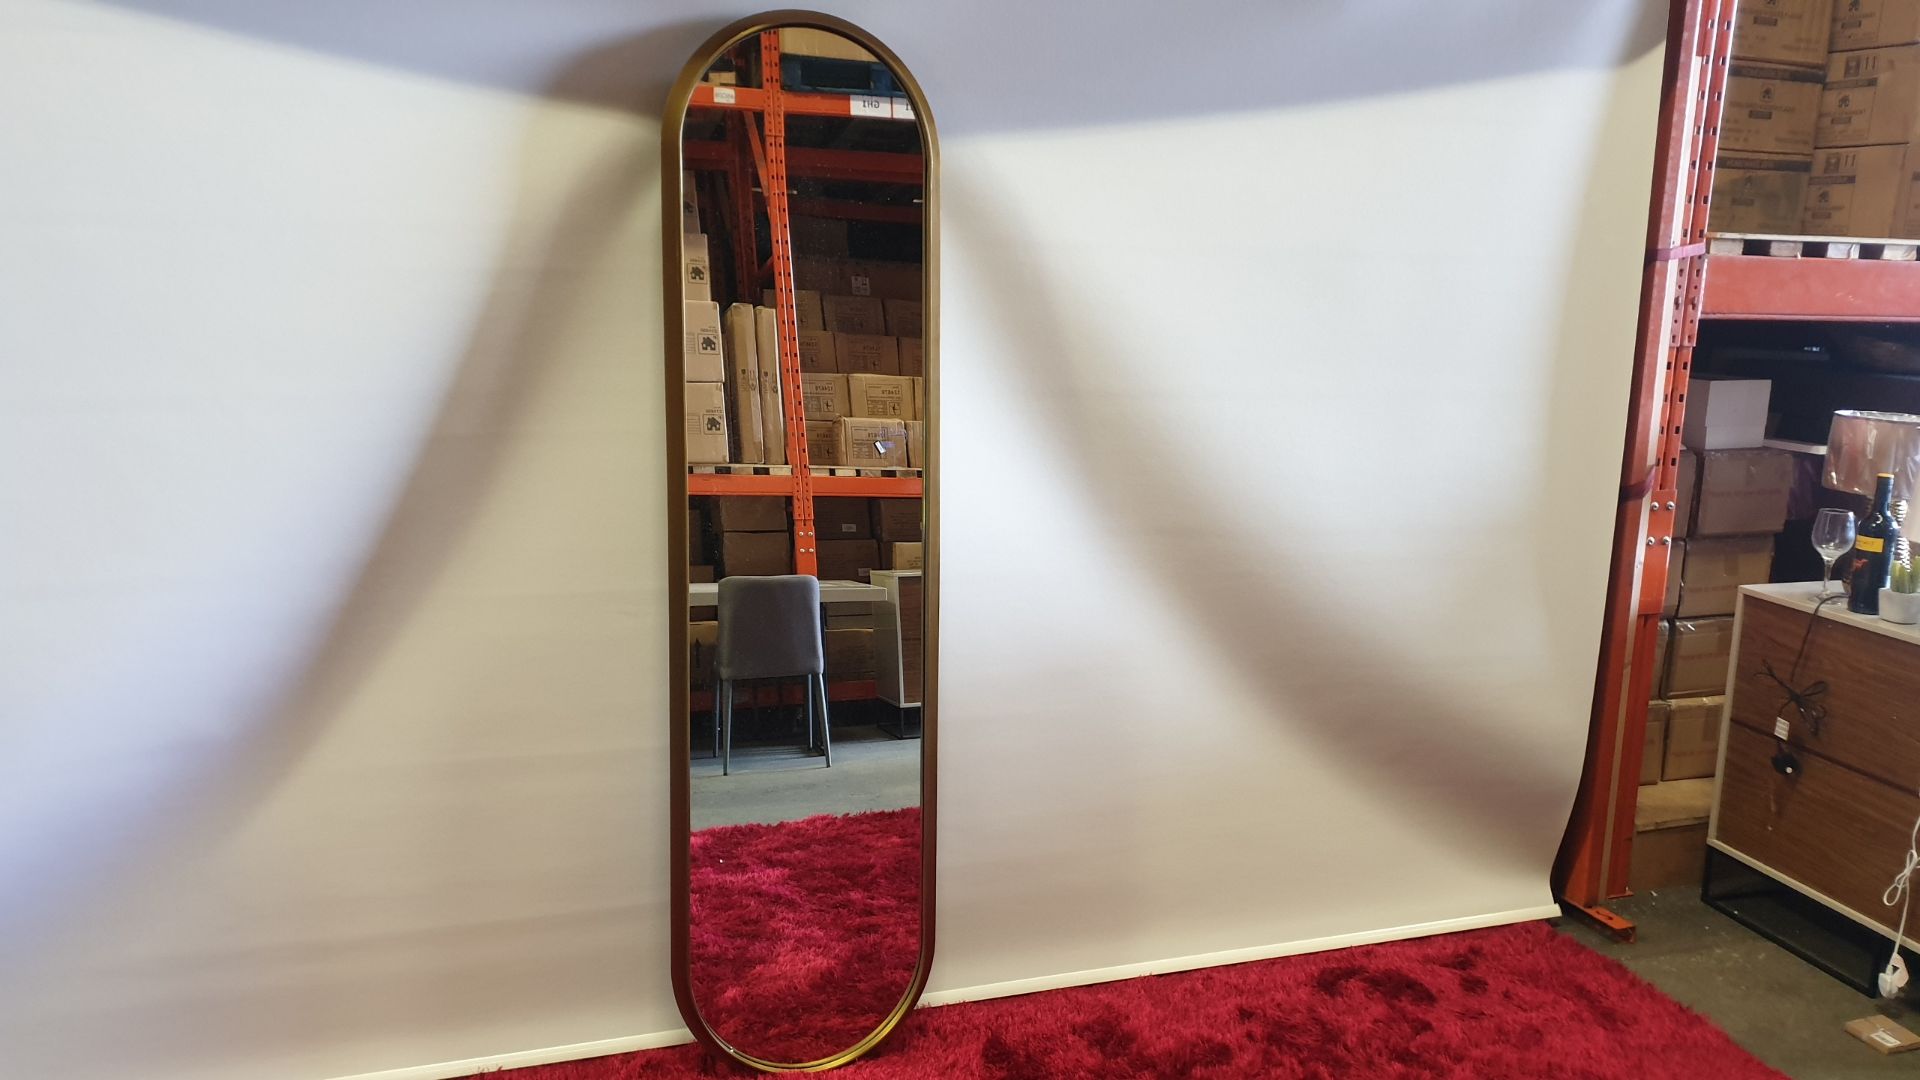 BRAND NEW BOXED LARGE GOLD TRIM WALL MIRROR WITH HANGING BARCKETS SIZE 500 X 96 X 1950 MM RRP £399.